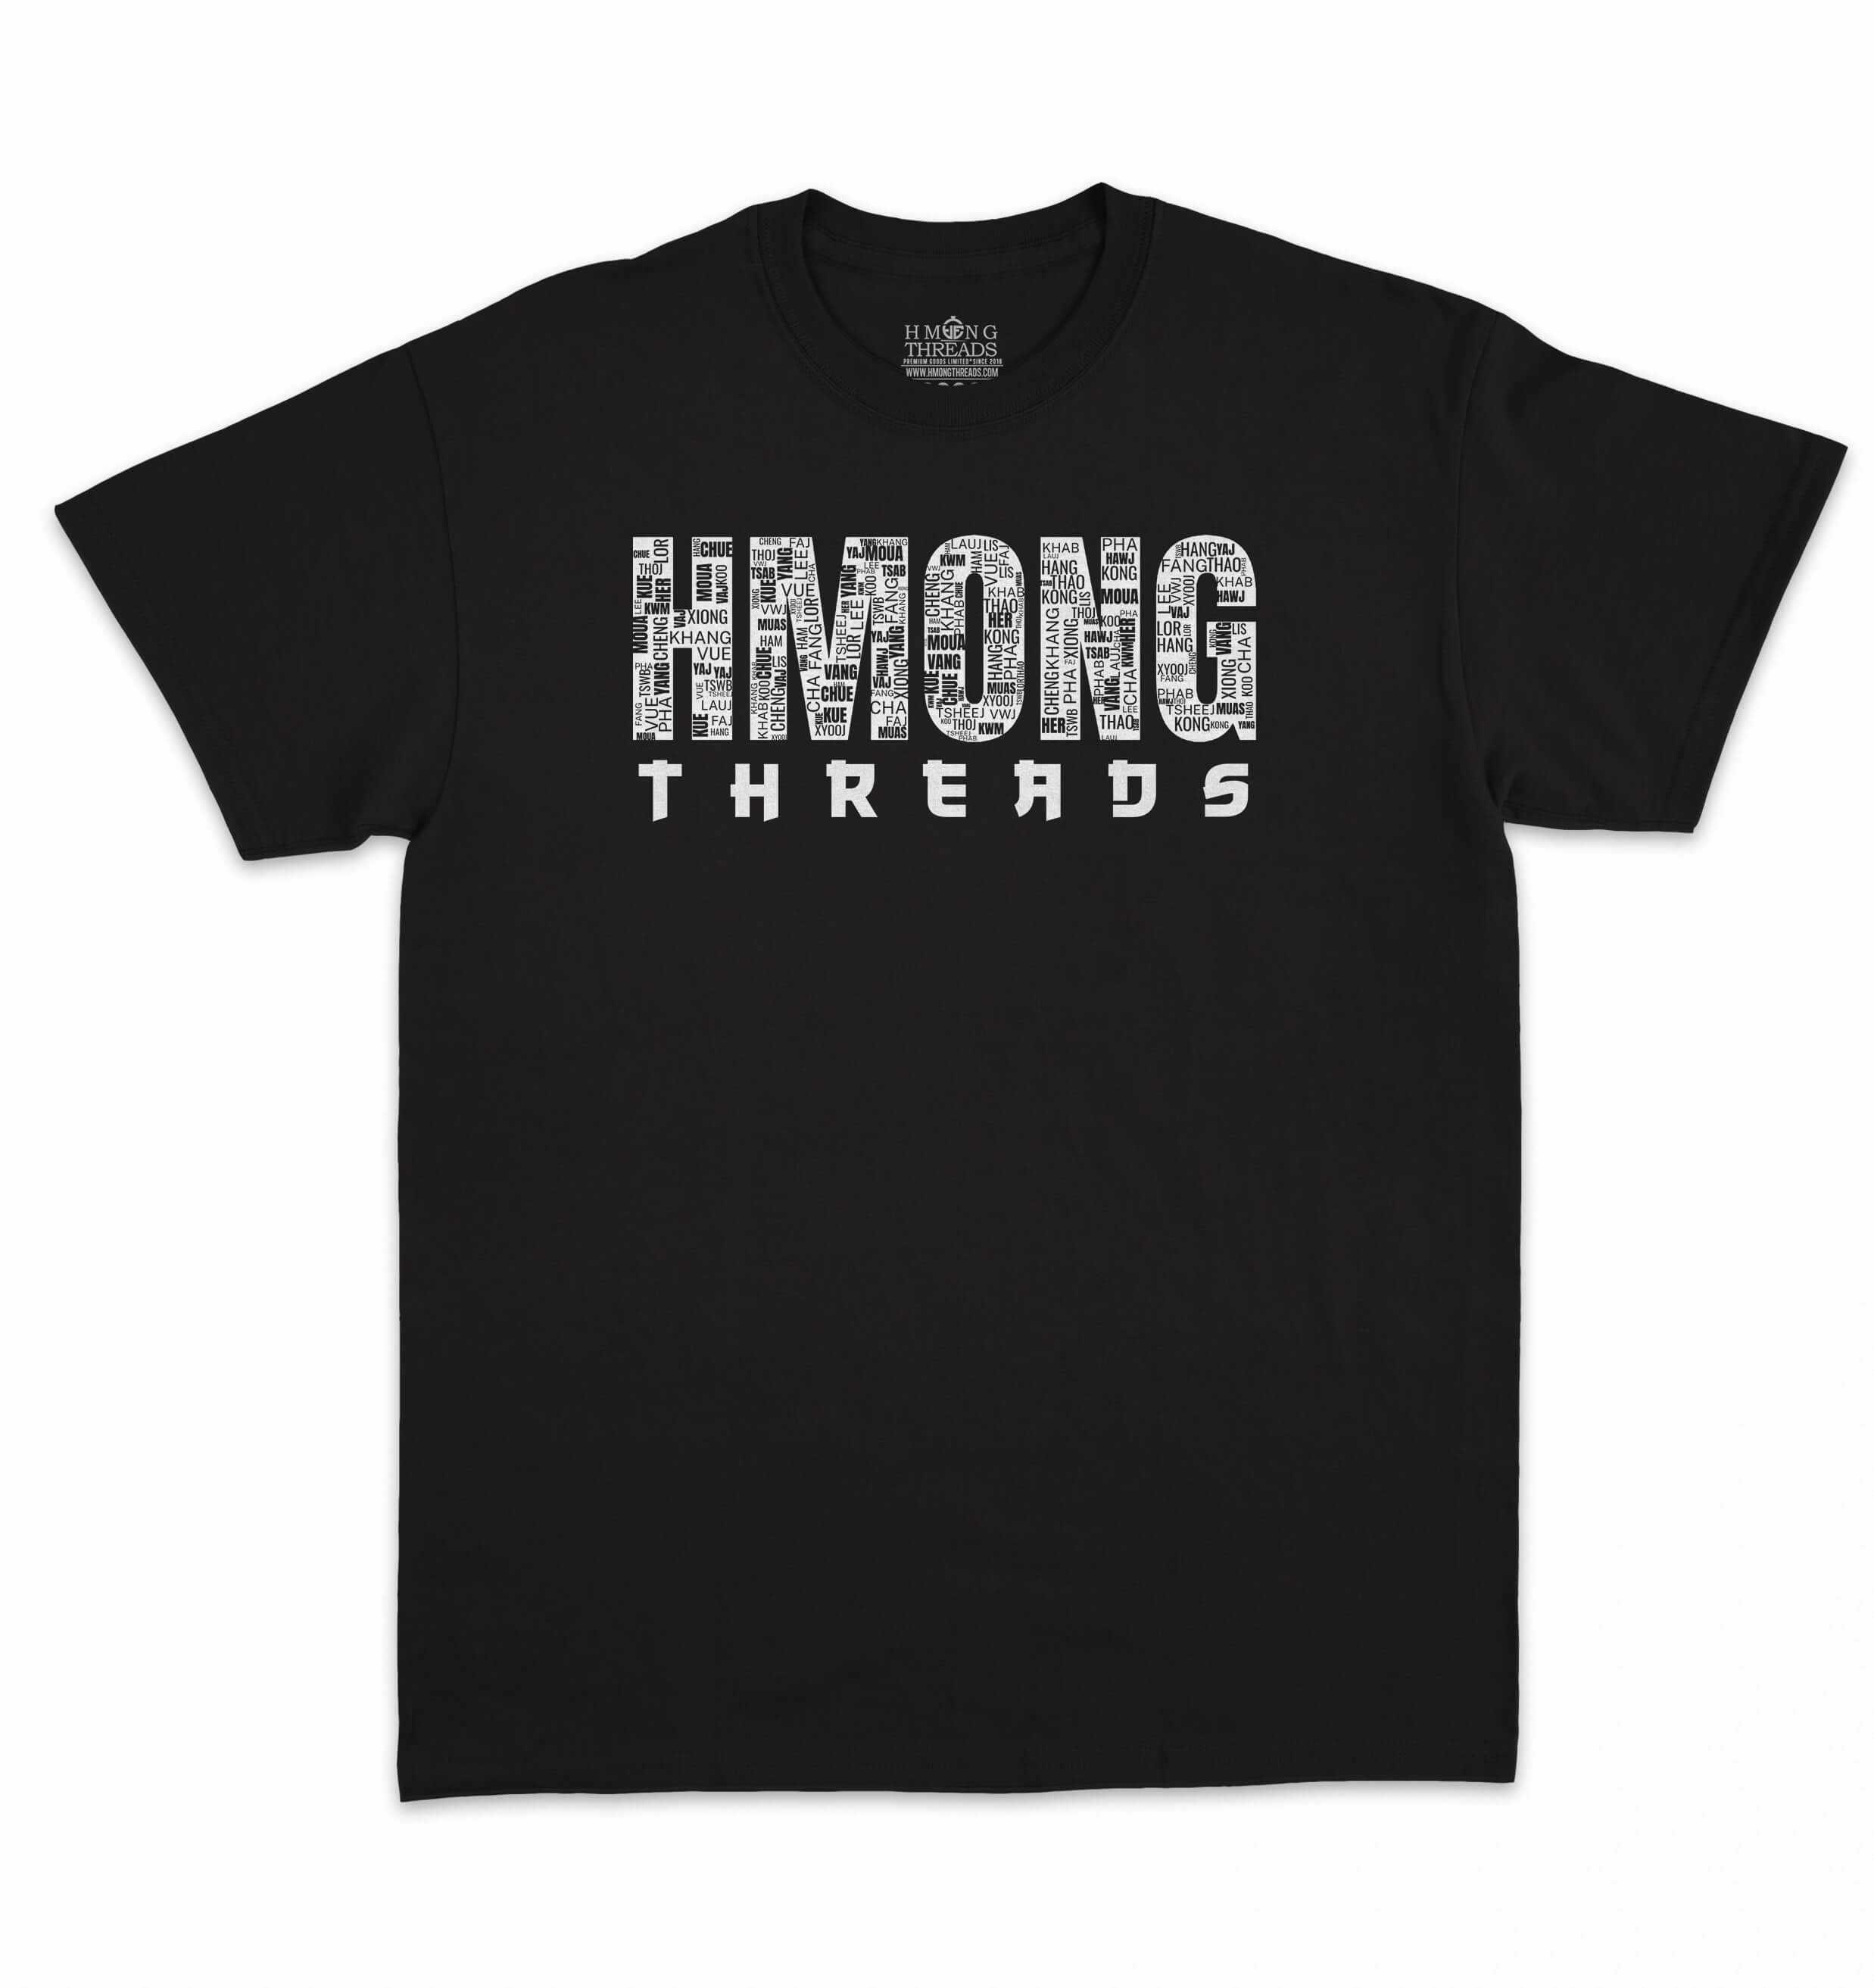 Hmong Threads Clans Tribute Tee - Black Unisex